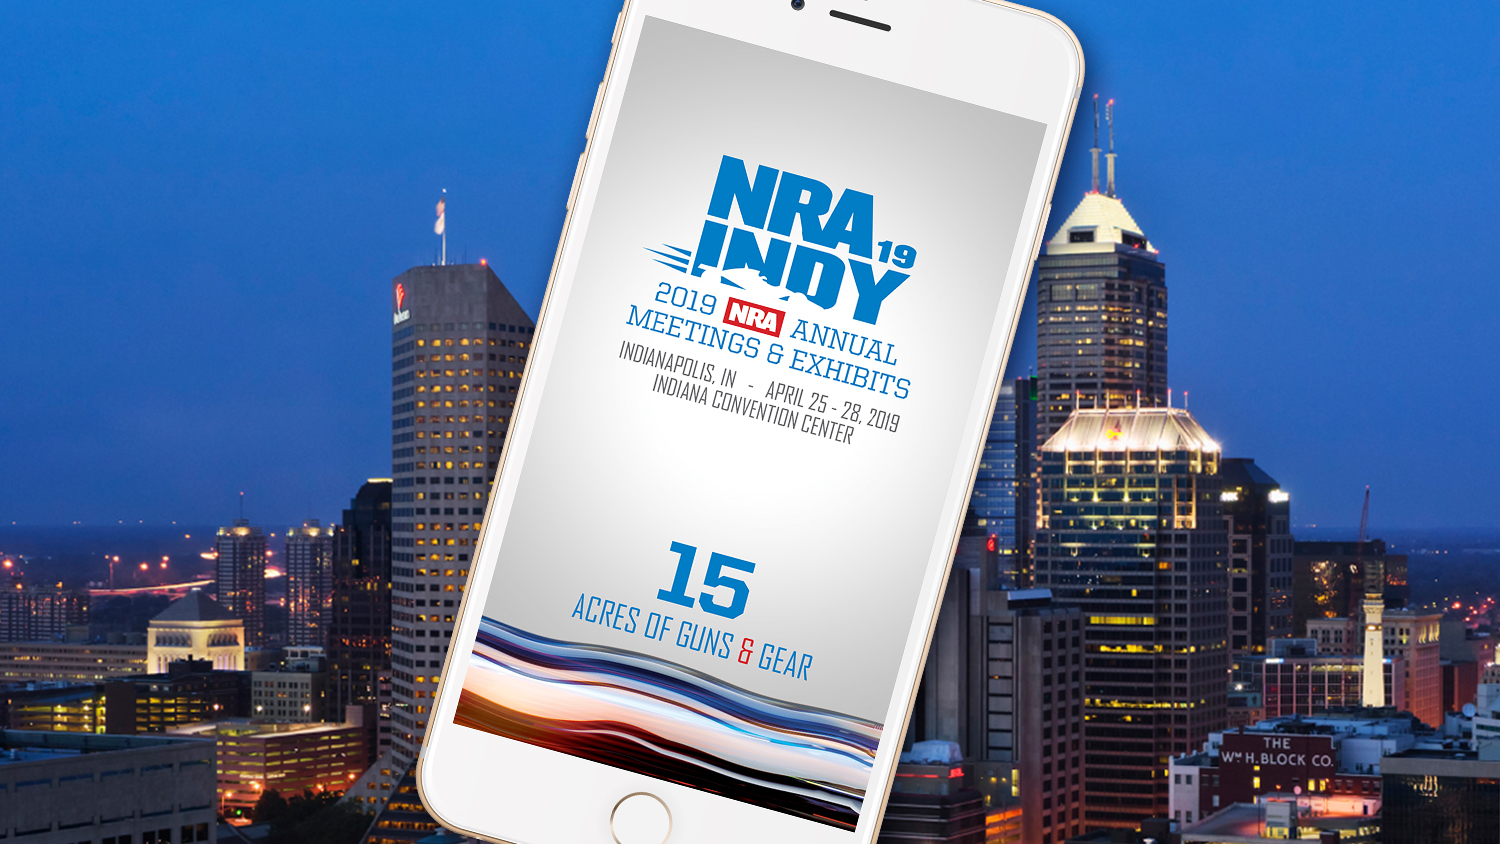 Download the 2019 NRA Annual Meetings & Exhibits Mobile App